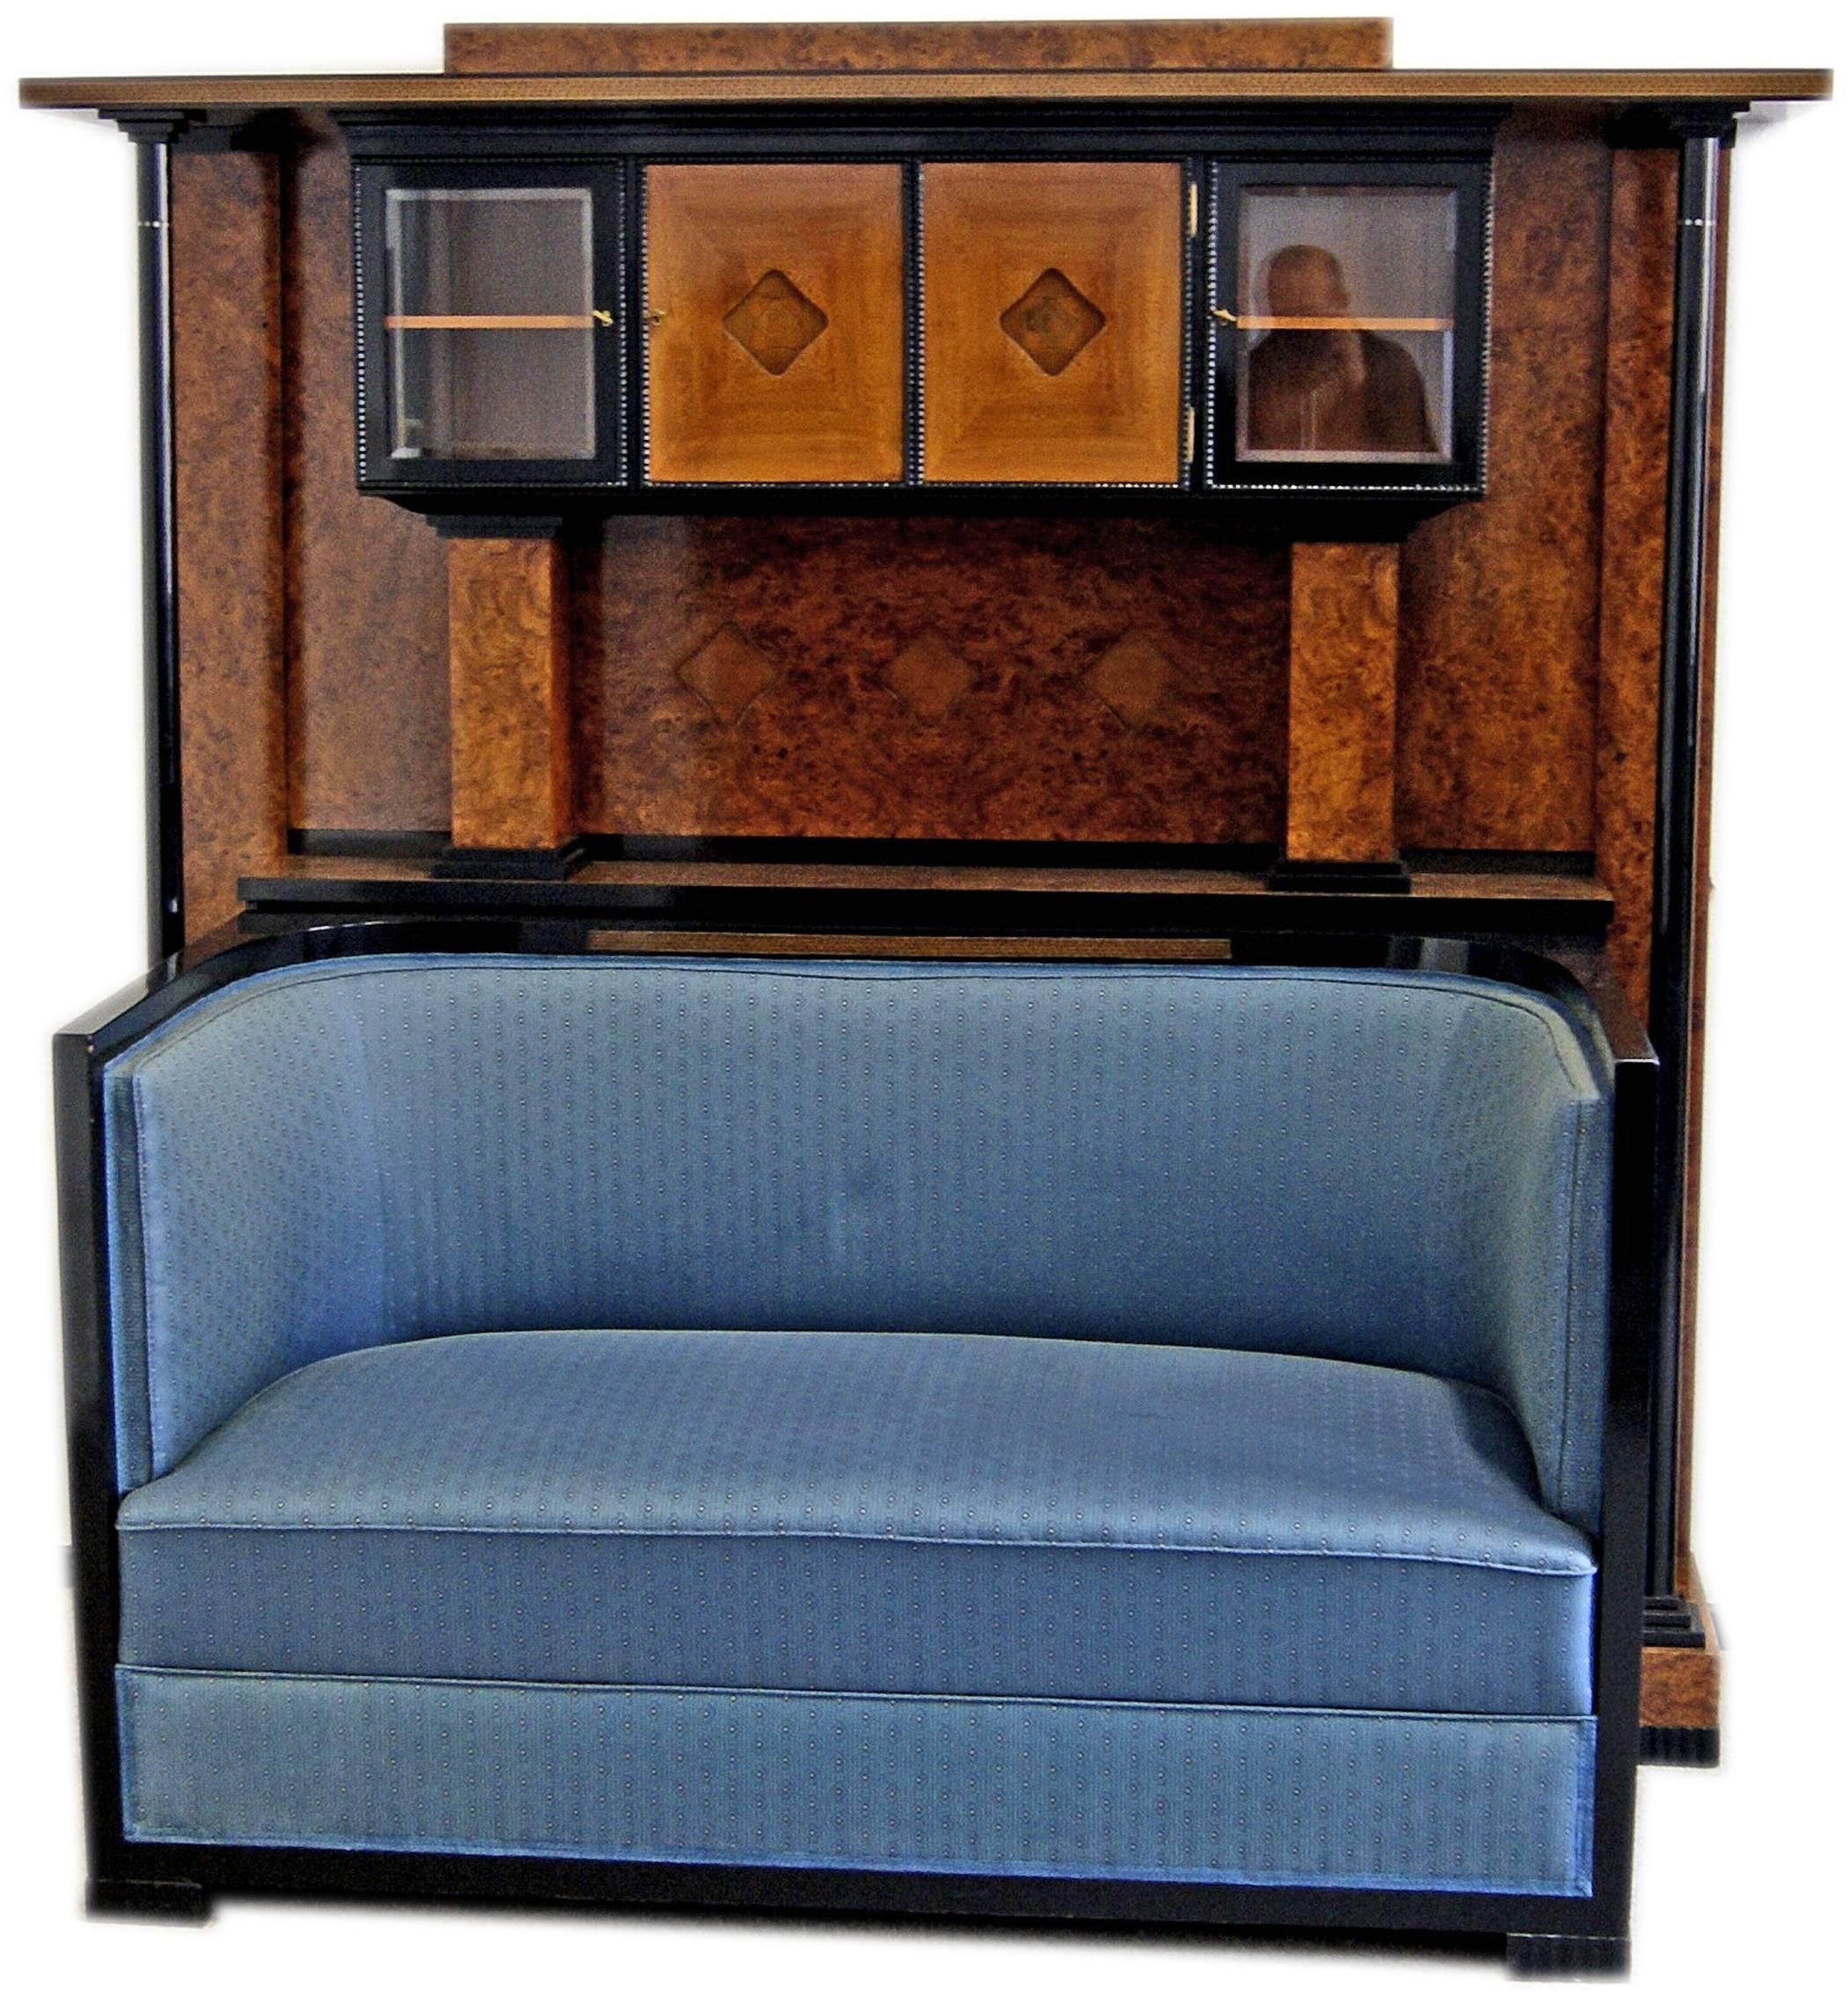 Gorgeous Art Nouveau music room settee with cabinet of finest manufacturing quality.

Designer:
Attributed to circle of Josef Maria Olbrich (1867 - 1908).
Olbrich, the world-famous Austrian architect and co-founder of the Viennese Secession, had